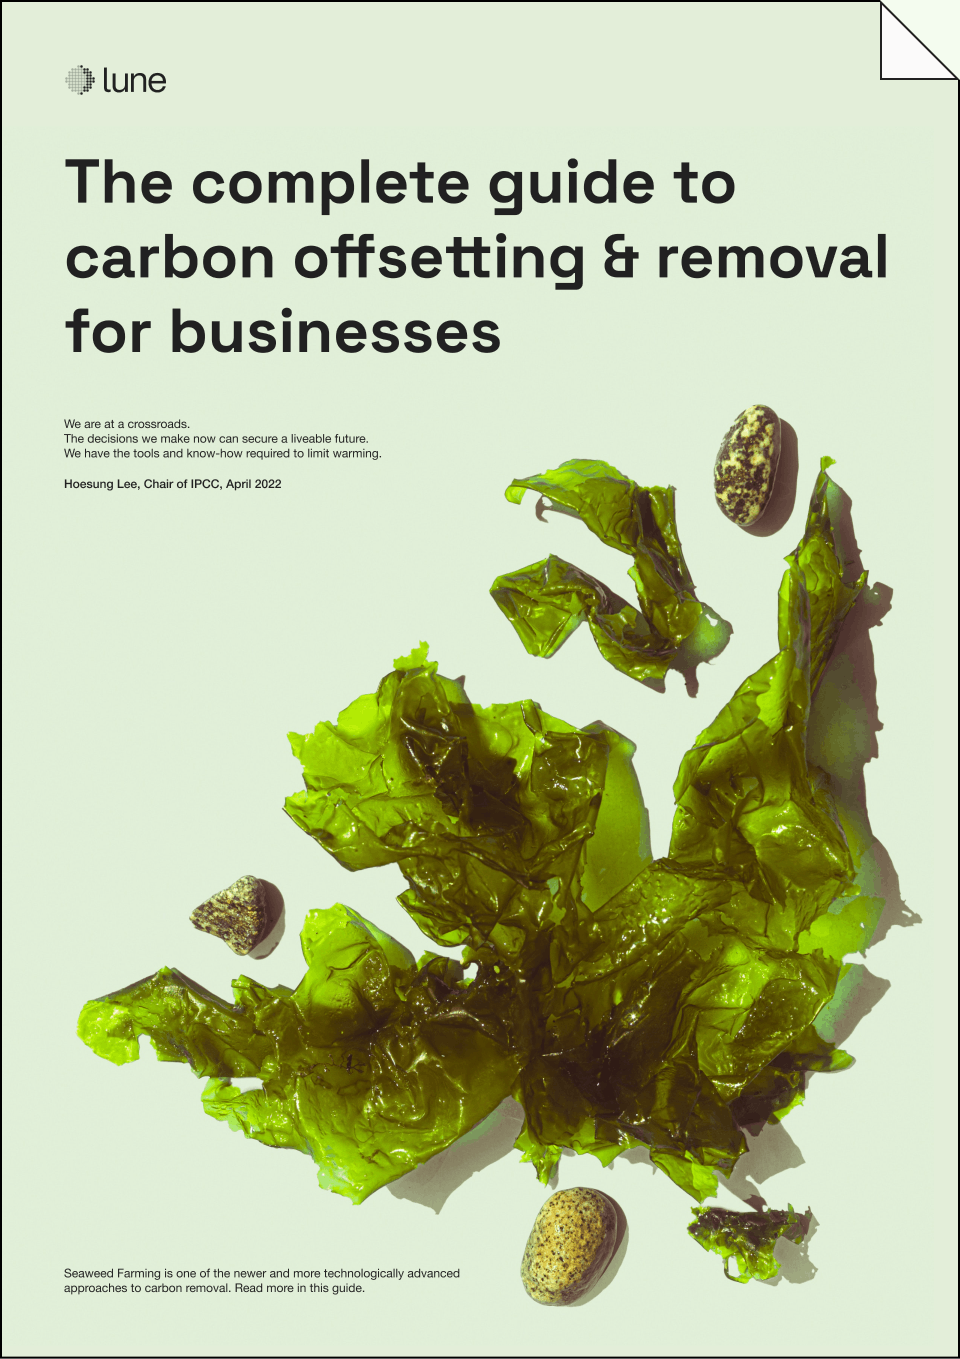 The complete guide to carbon offsetting and removal for businesses